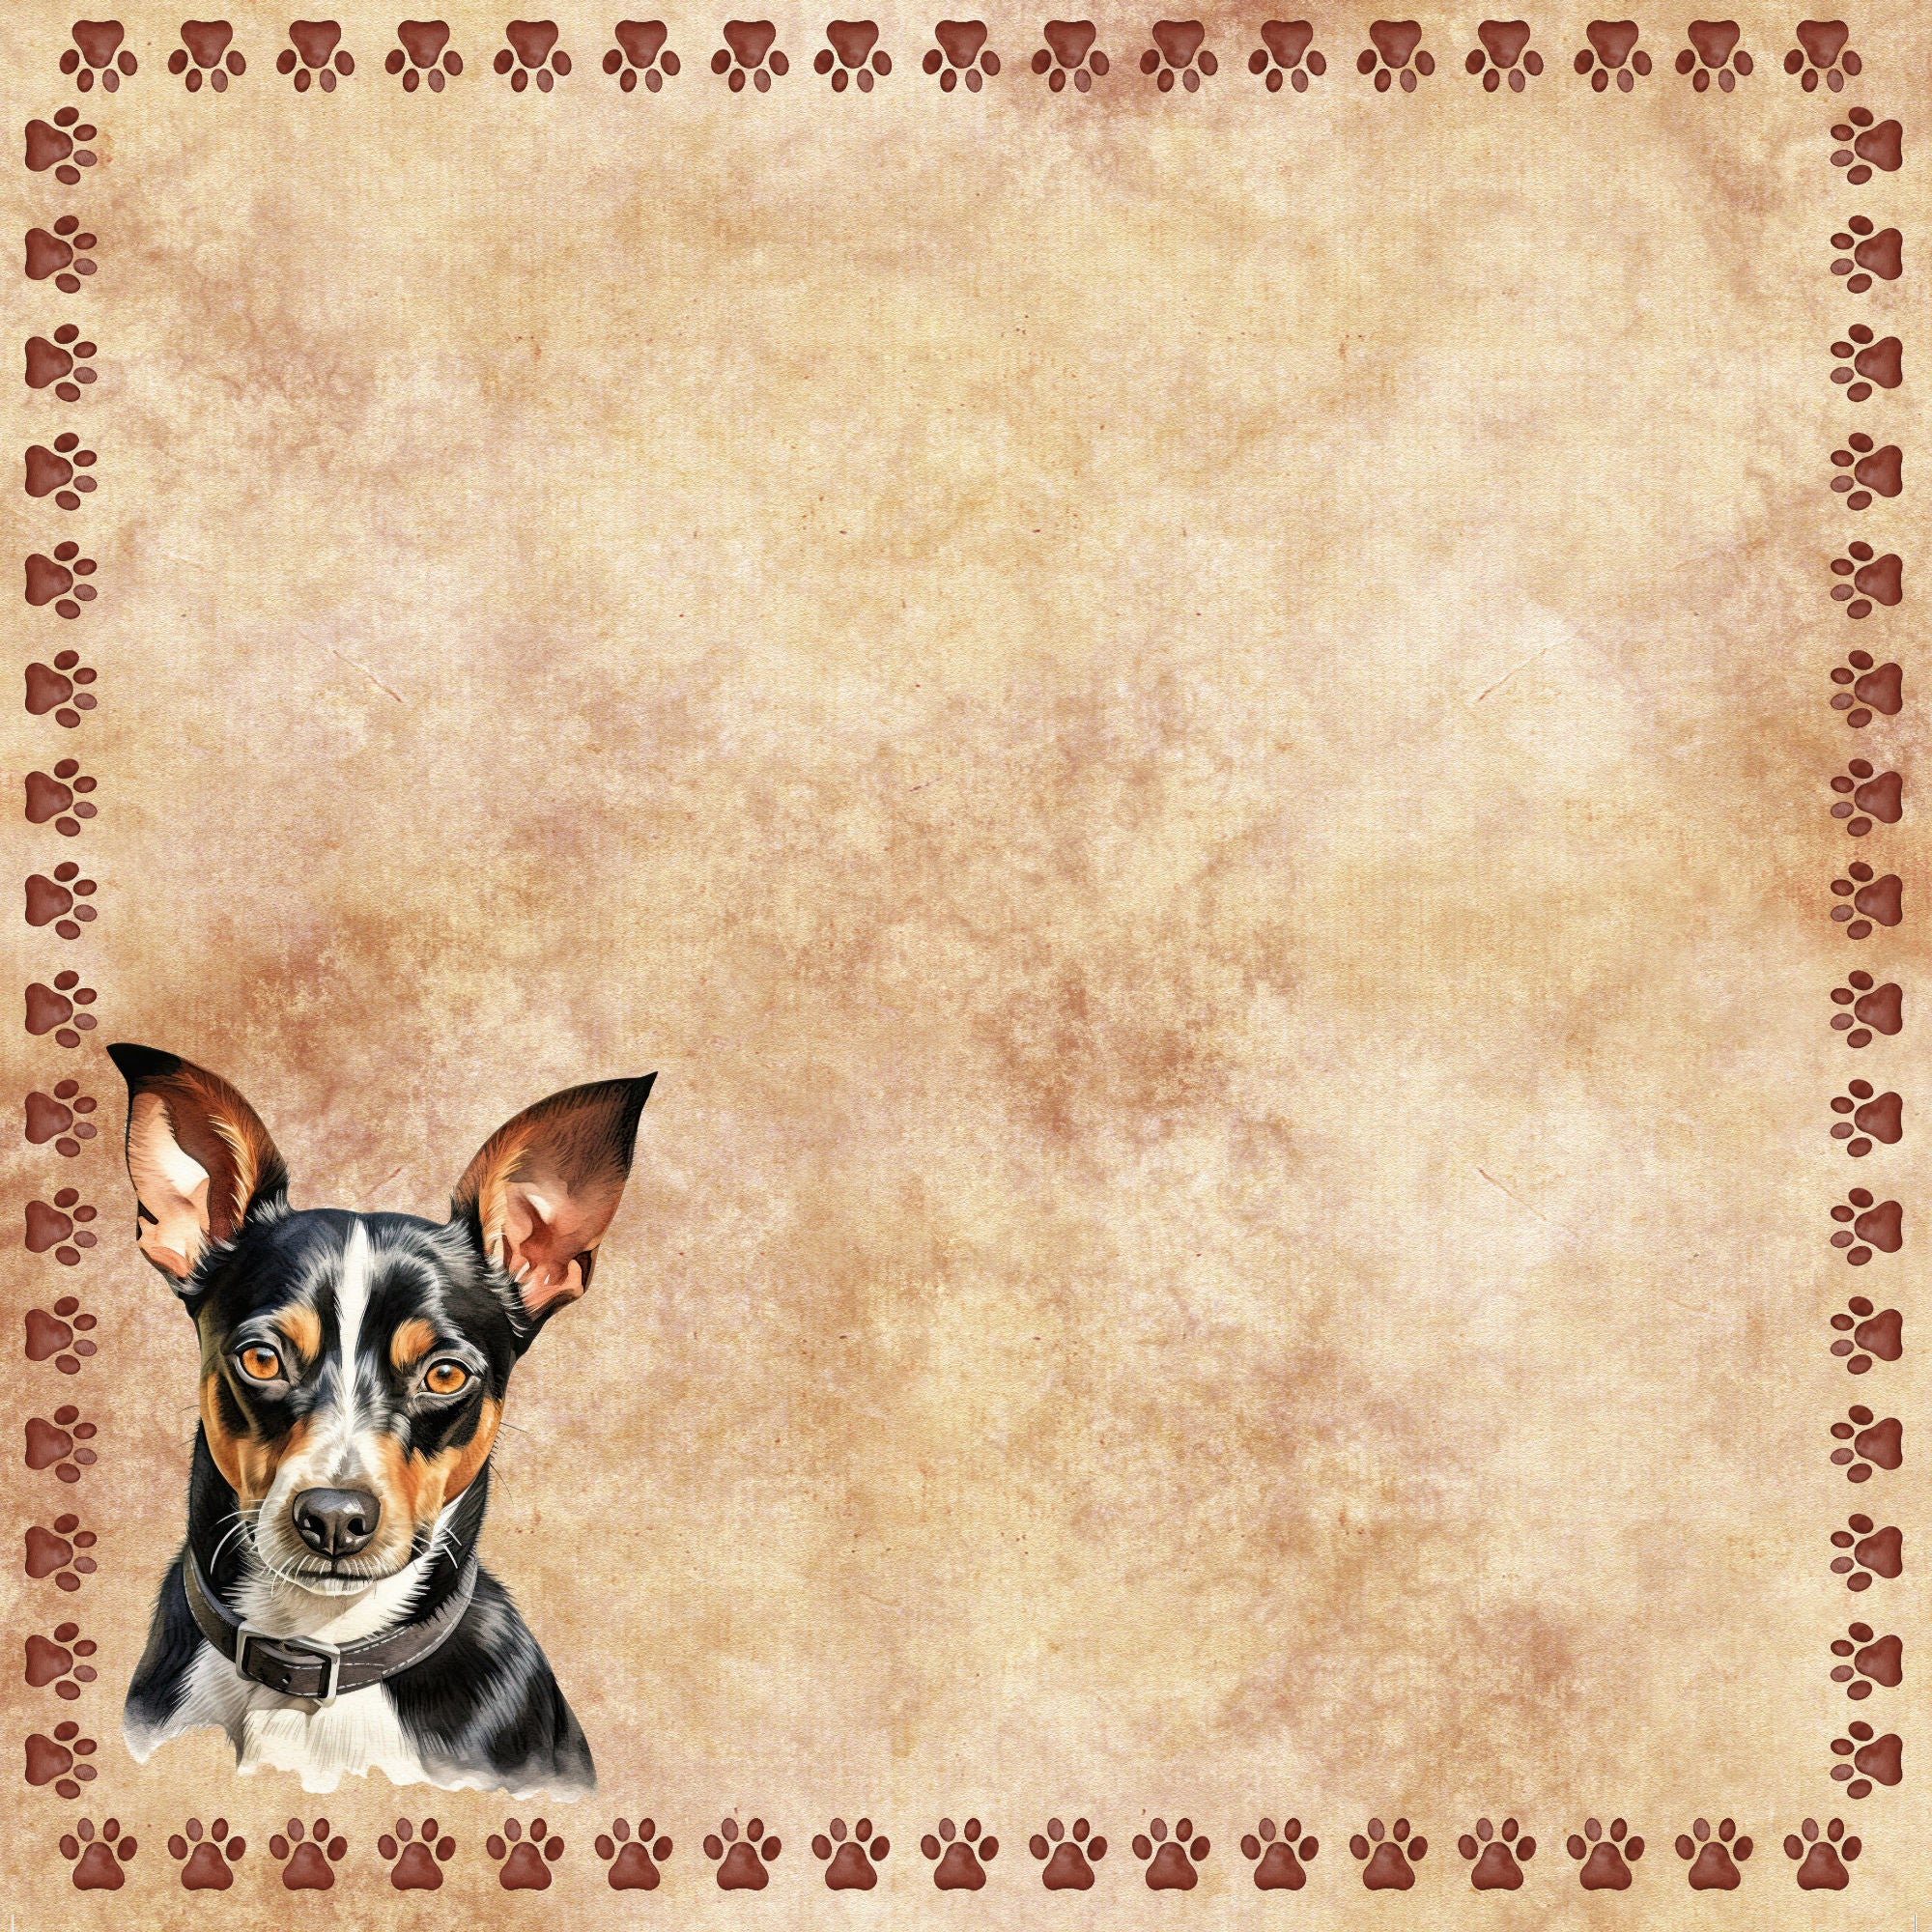 Dog Breeds Collection Rat Terrier 12 x 12 Double-Sided Scrapbook Paper by SSC Designs